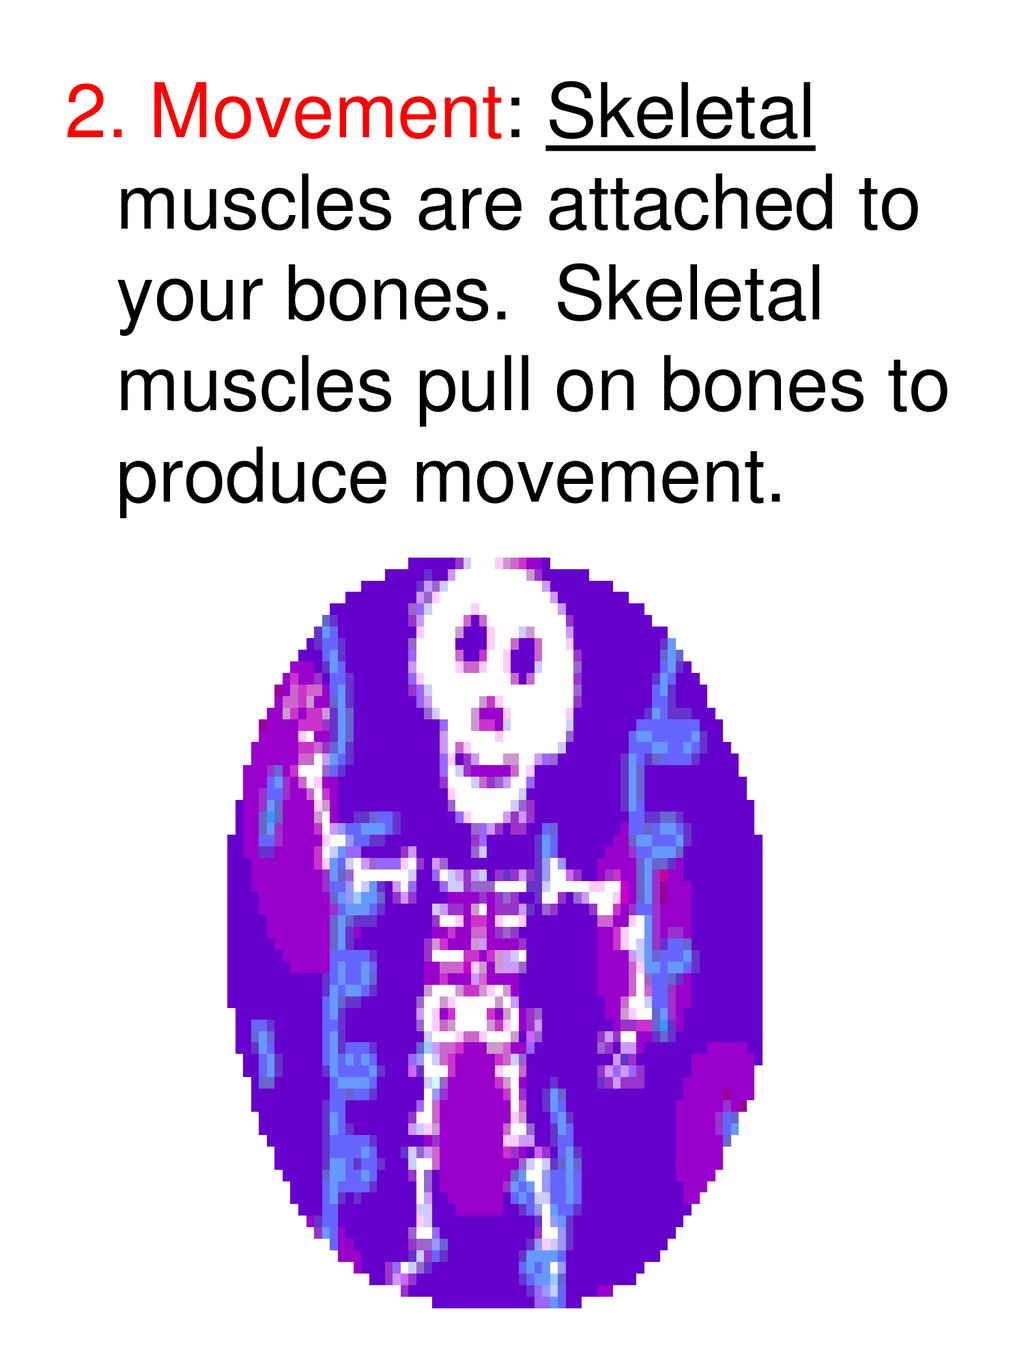 2. Movement: Skeletal muscles are attached to your bones